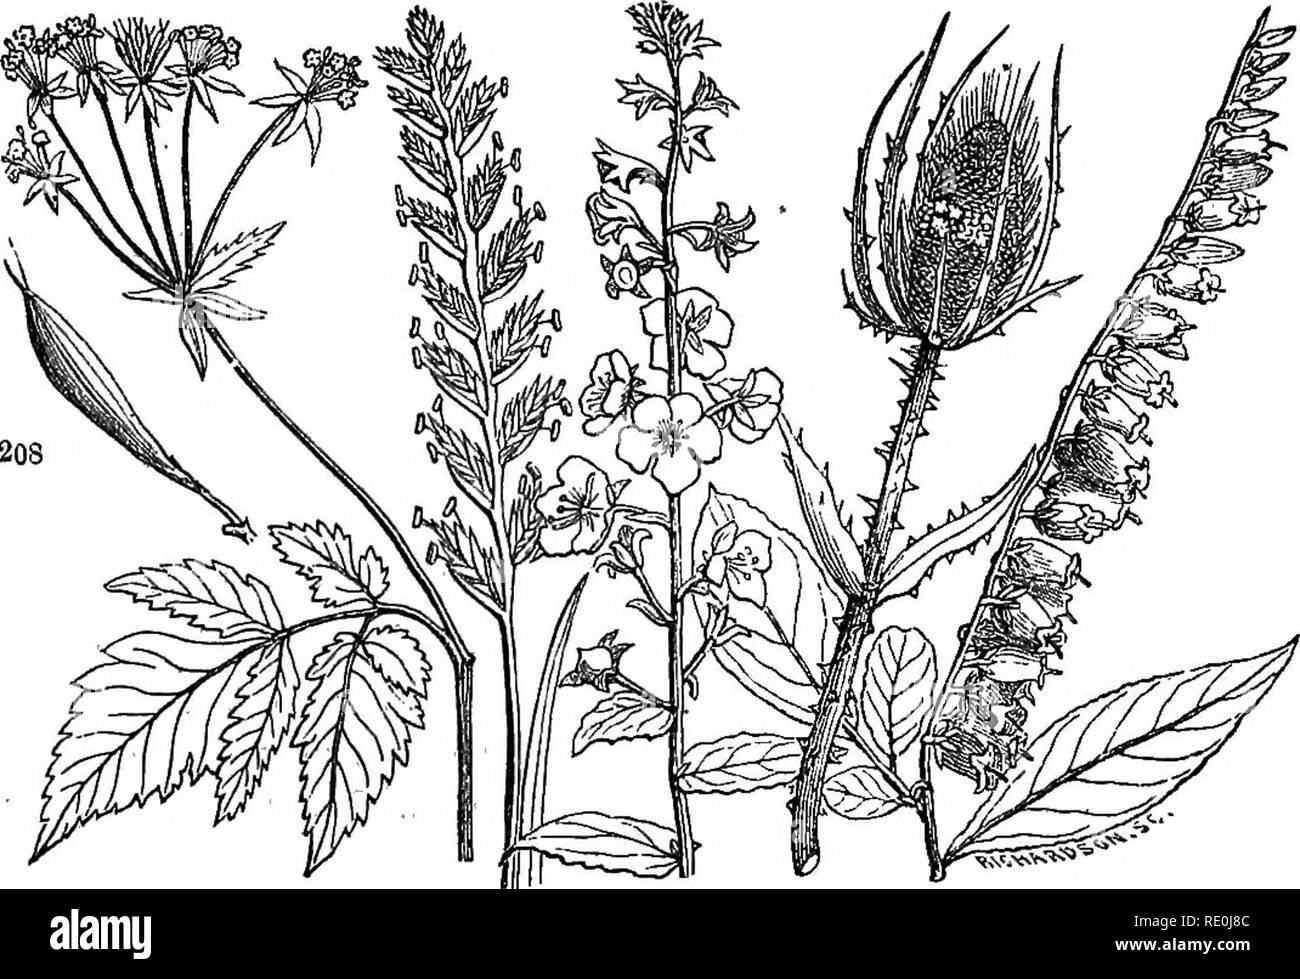 . Class-book of botany : being outlines of the structure, physiology and classification of plants : with a flora of the United States and Canada . Botany; Botany; Botany. 72 INFLORESCENCE. / 350. The corymb differs from tte raceme in having tte lower pedi- cels lengthened so as to elevate all the flowers to about the same level, as in the wild thorn.. 207 205 204 206 208 208, Andromeda raccmosa ; flowers in a secund raceme. 204, Verbascum Blattaria; raceme. 205, Lolium perenne ; a compound spike or a spike of spikelets. 206, Bipsacus sylvestris ; head with an involucre of leaves. 207,. Osmorhi Stock Photo